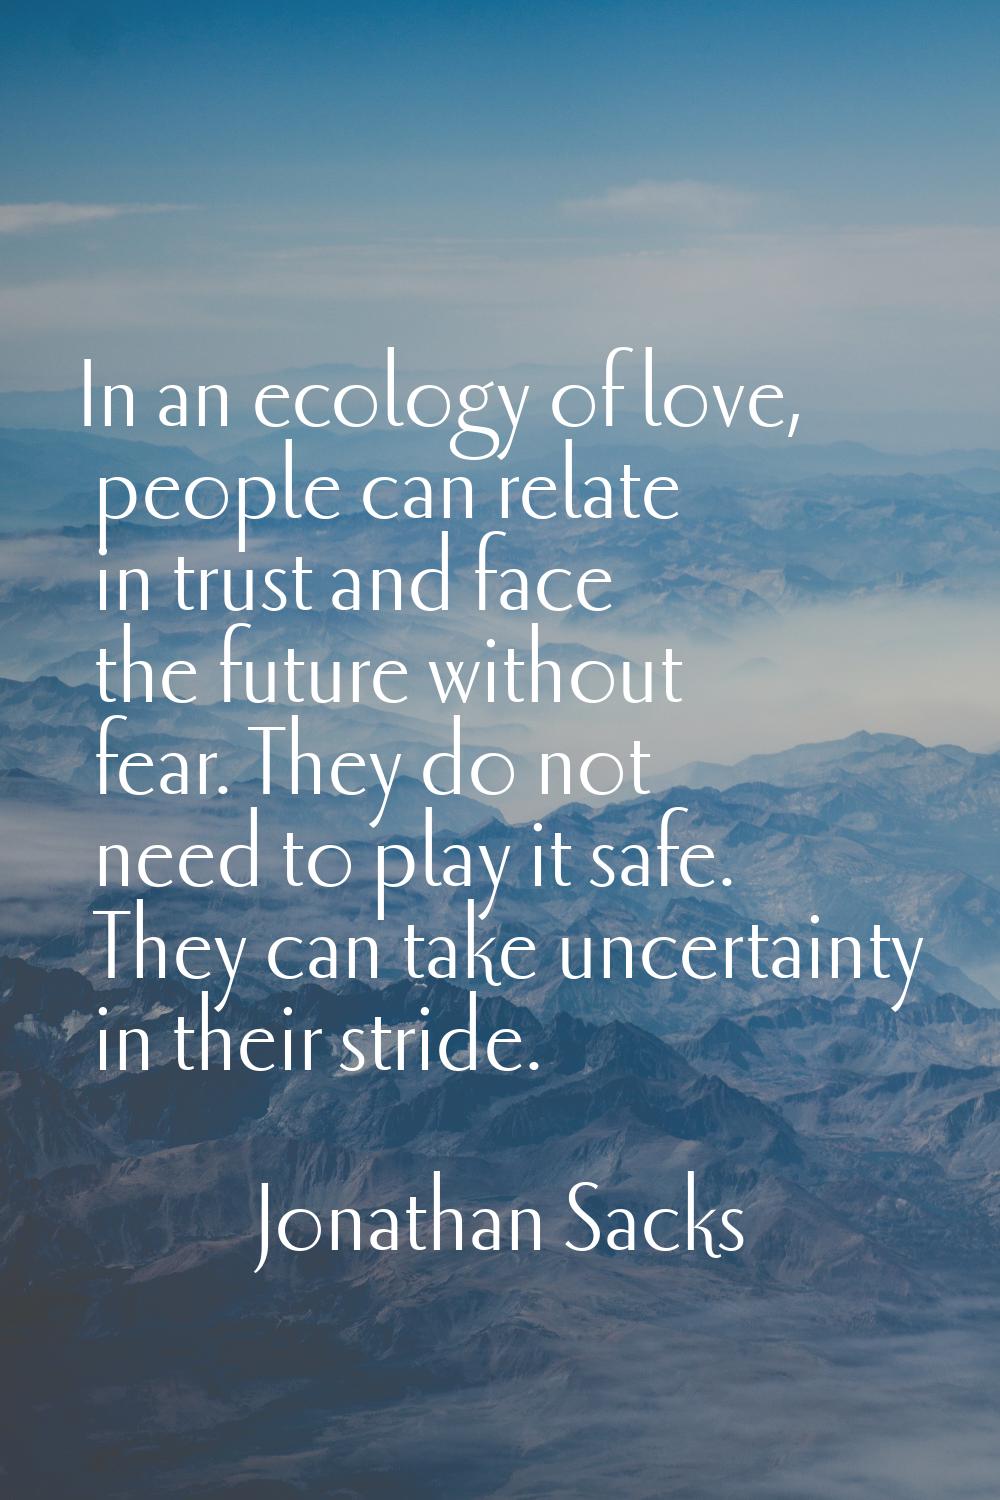 In an ecology of love, people can relate in trust and face the future without fear. They do not nee